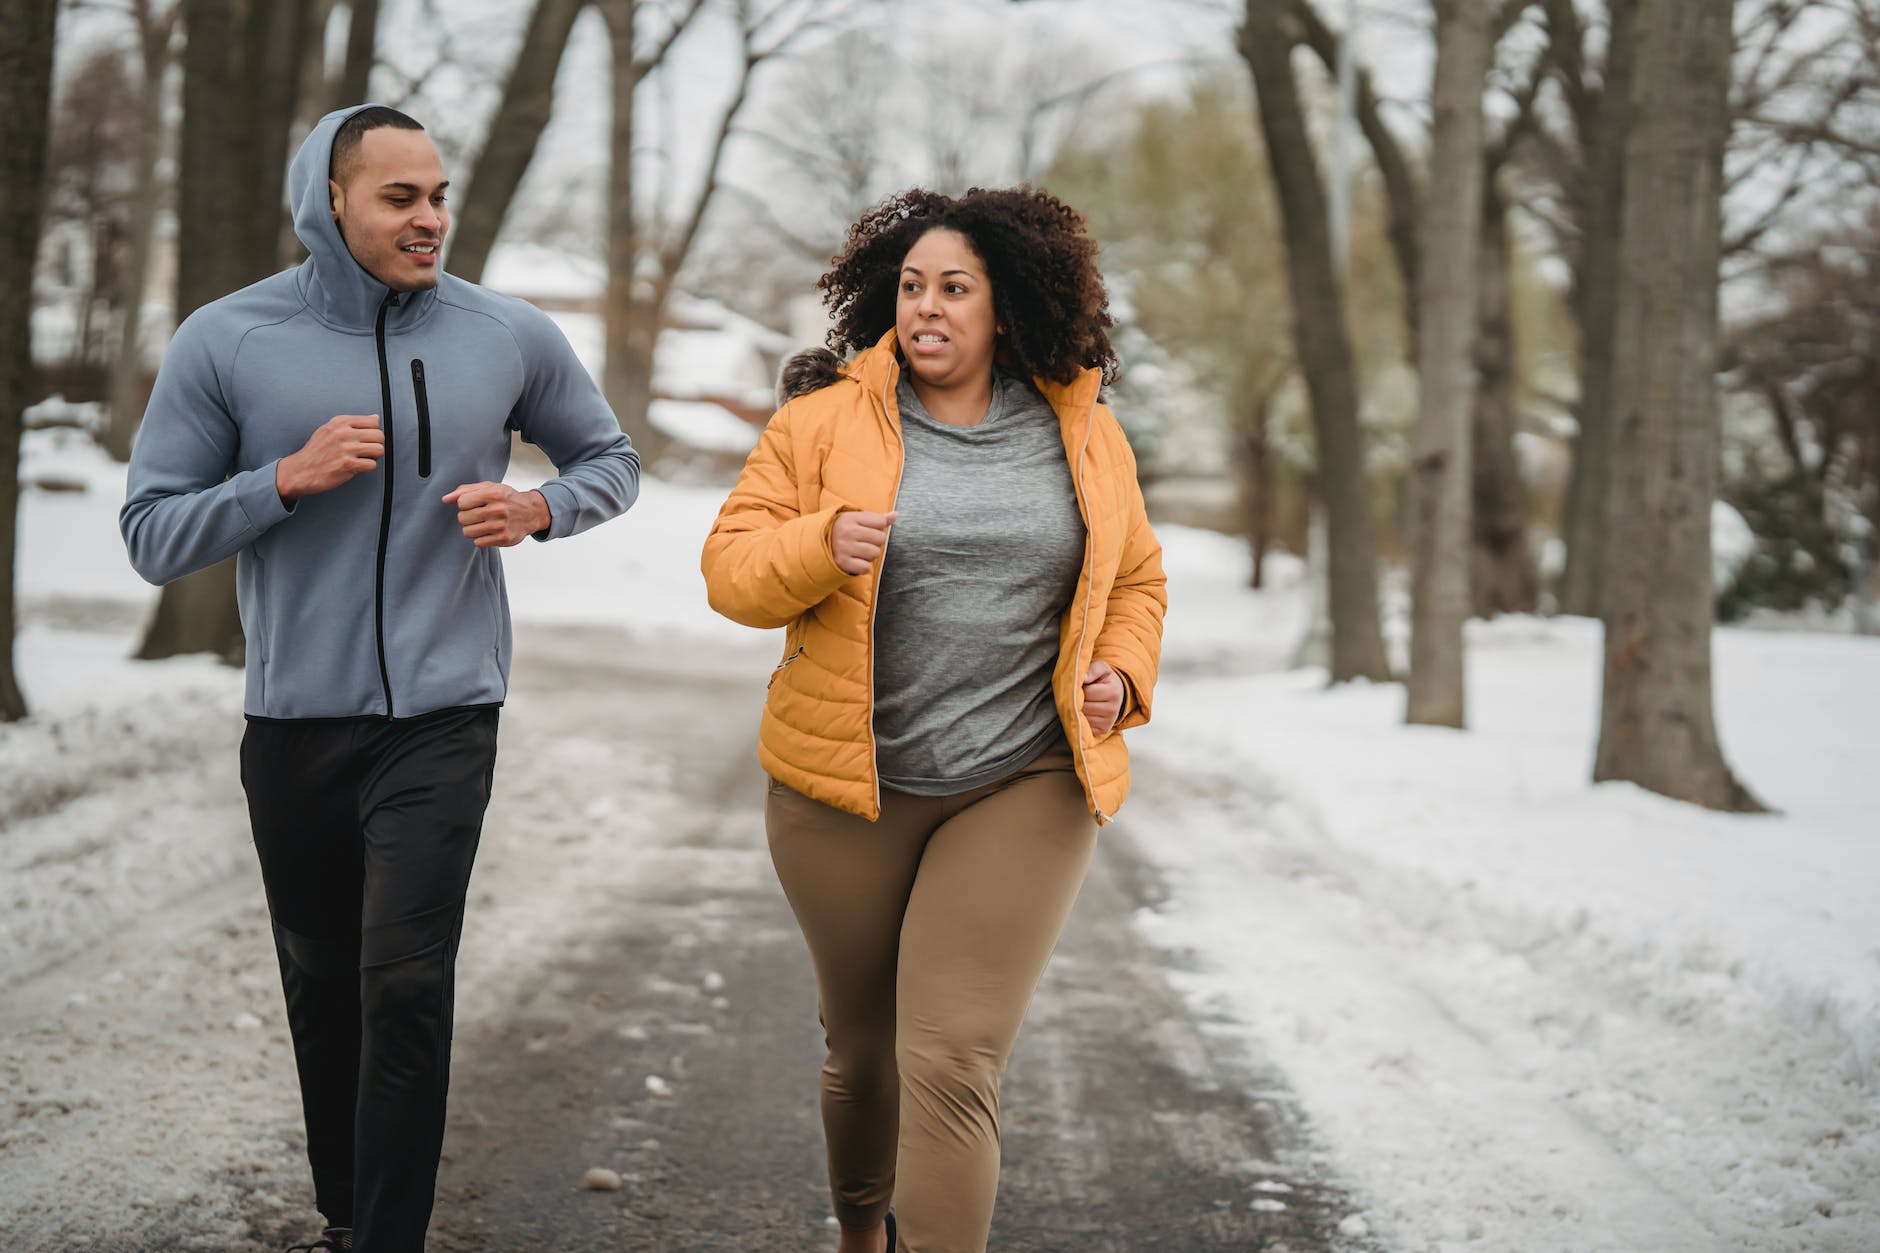 determined plump black woman jogging with trainer on pathway